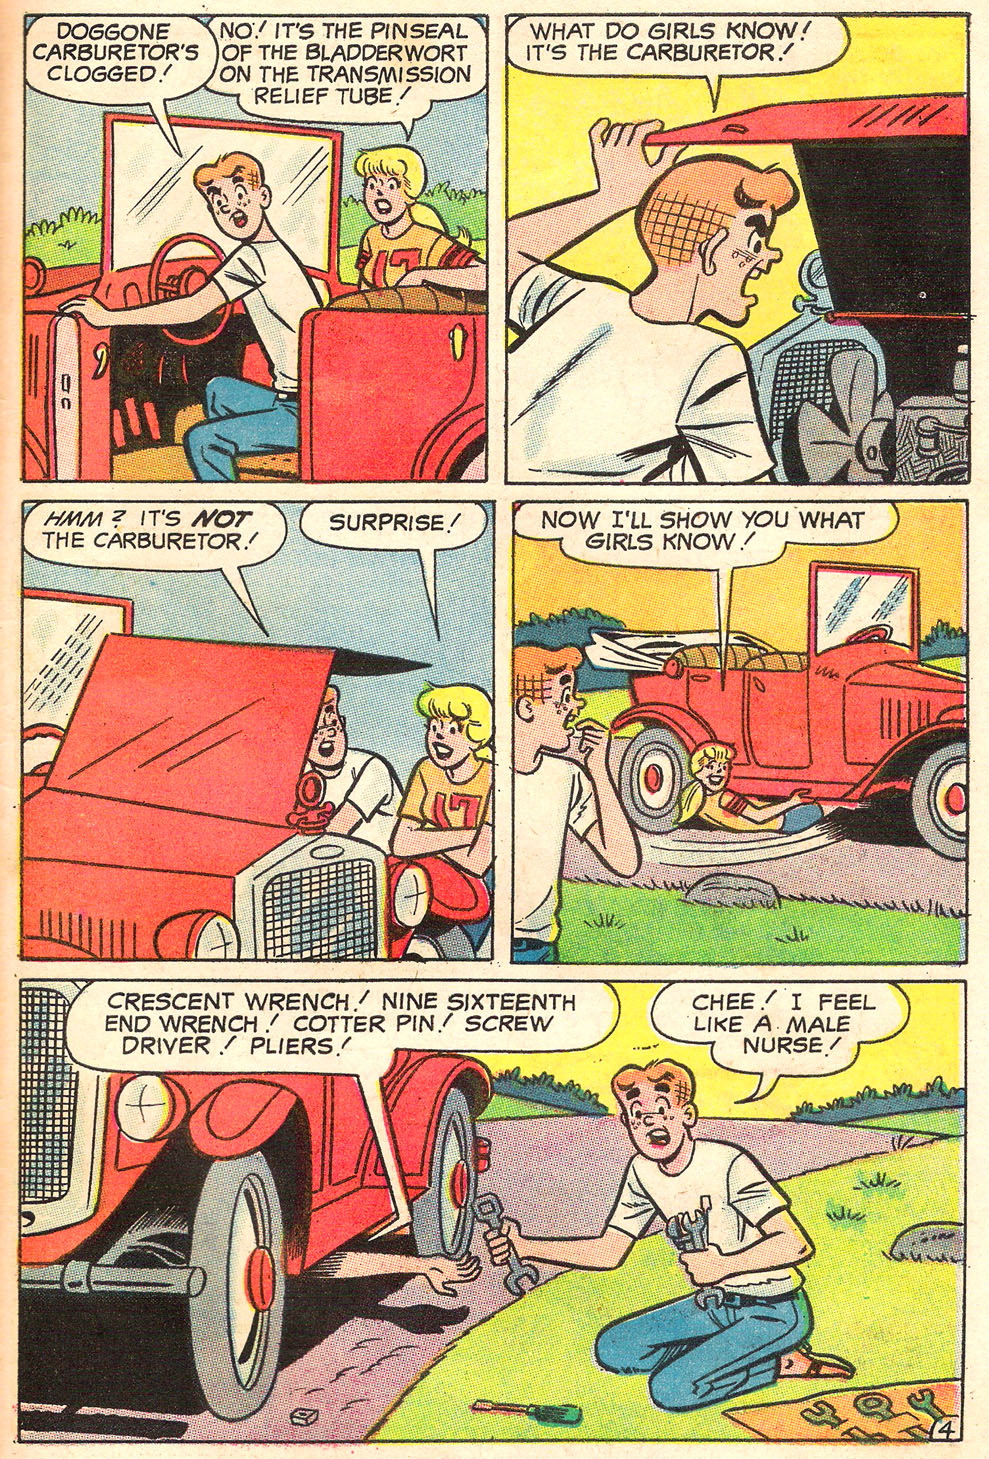 Read online Archie's Girls Betty and Veronica comic -  Issue #155 - 30